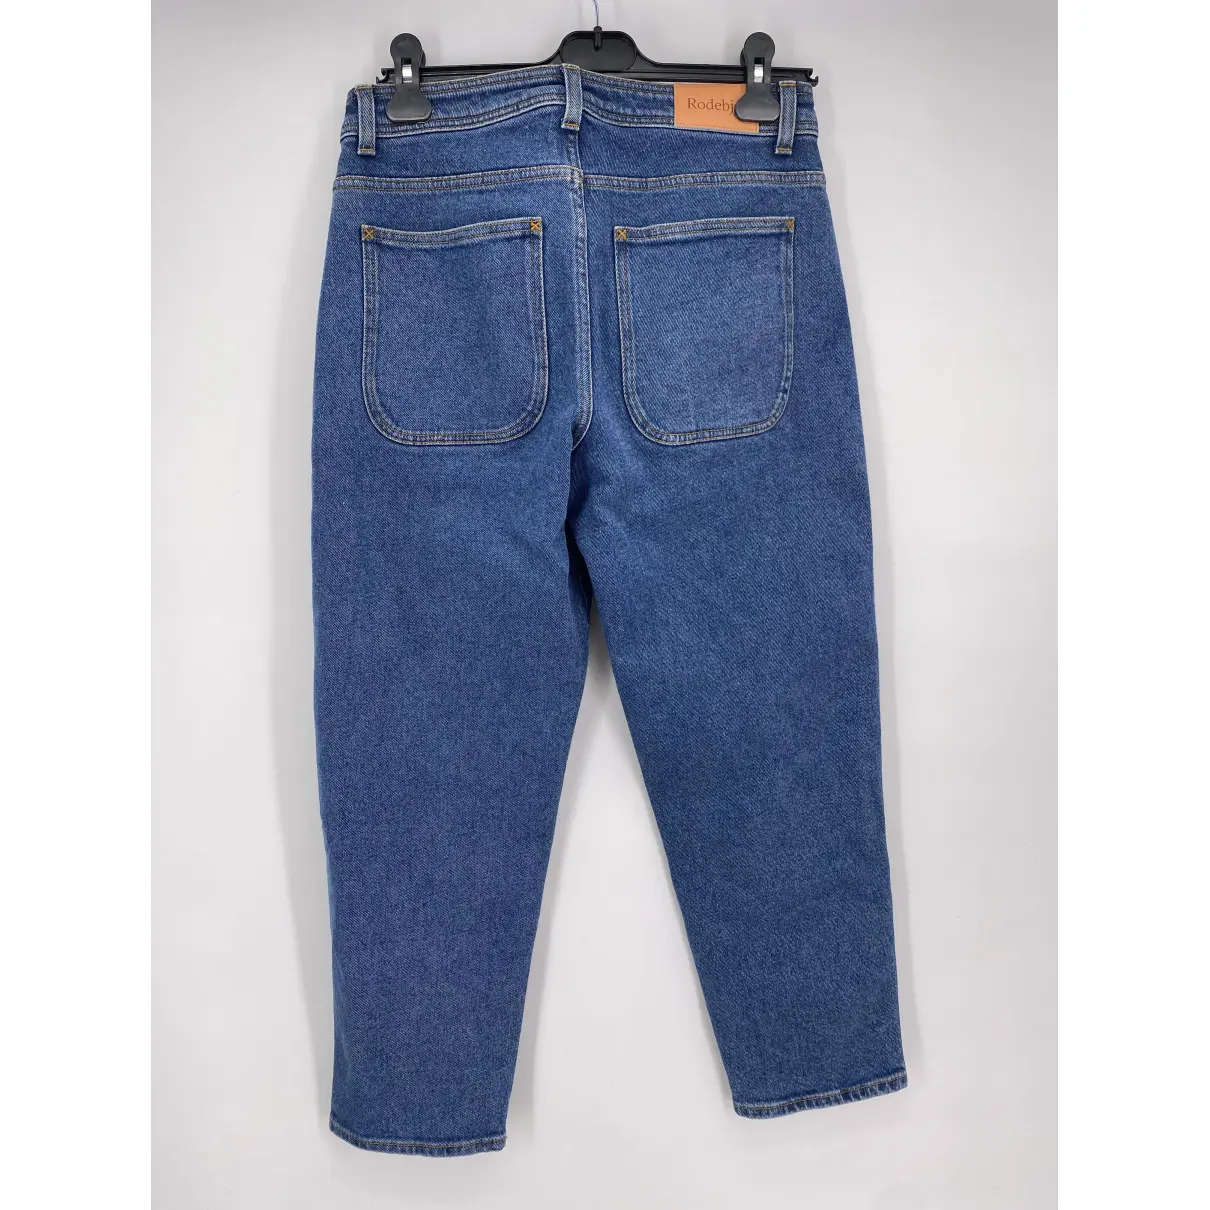 Buy Rodebjer Straight jeans online